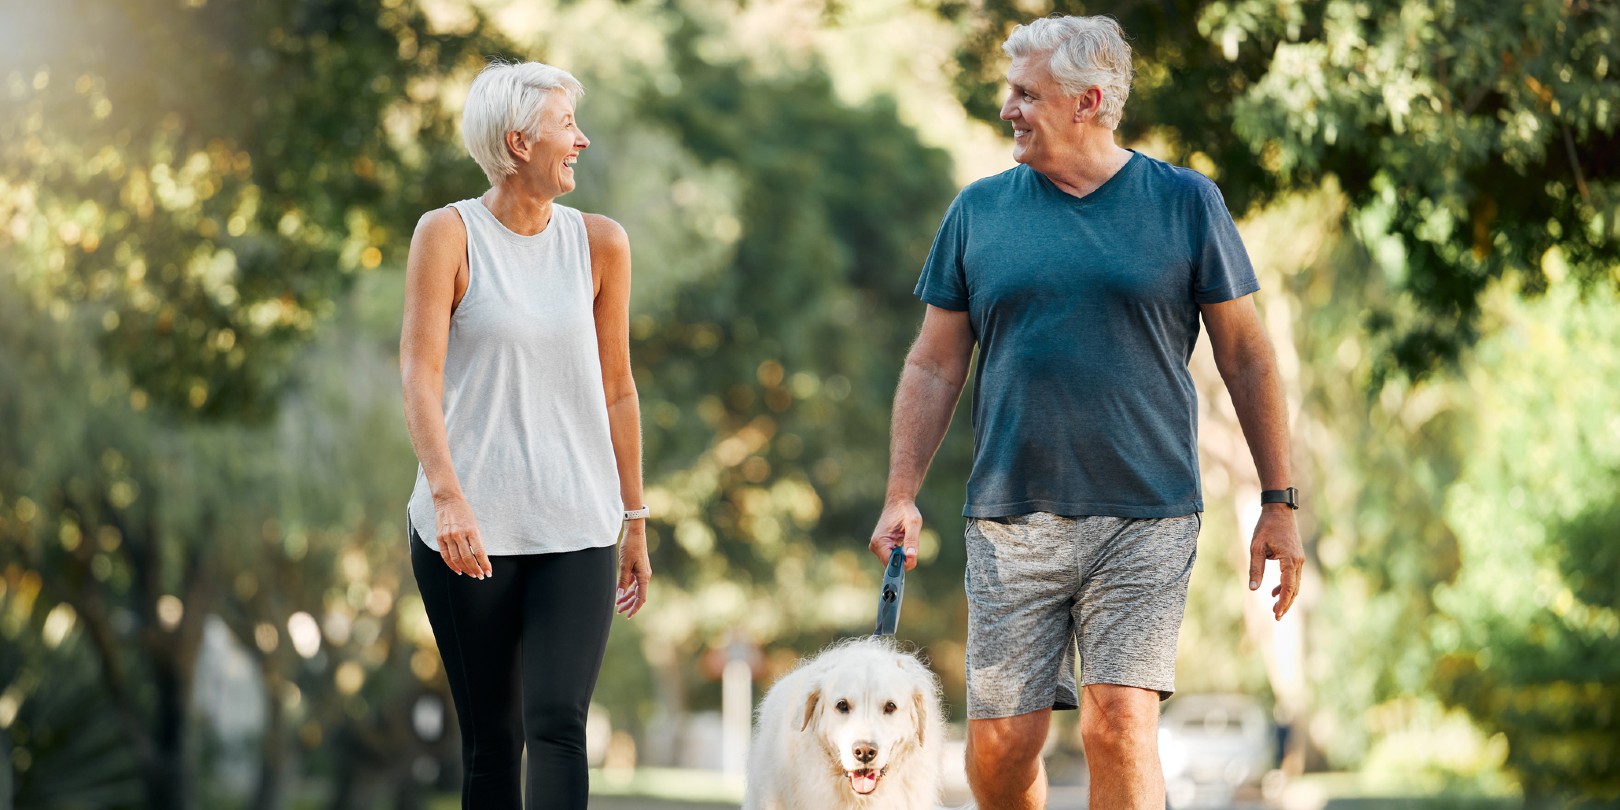 Love, wellness and pet with old man and senior woman in outdoor morning walk together